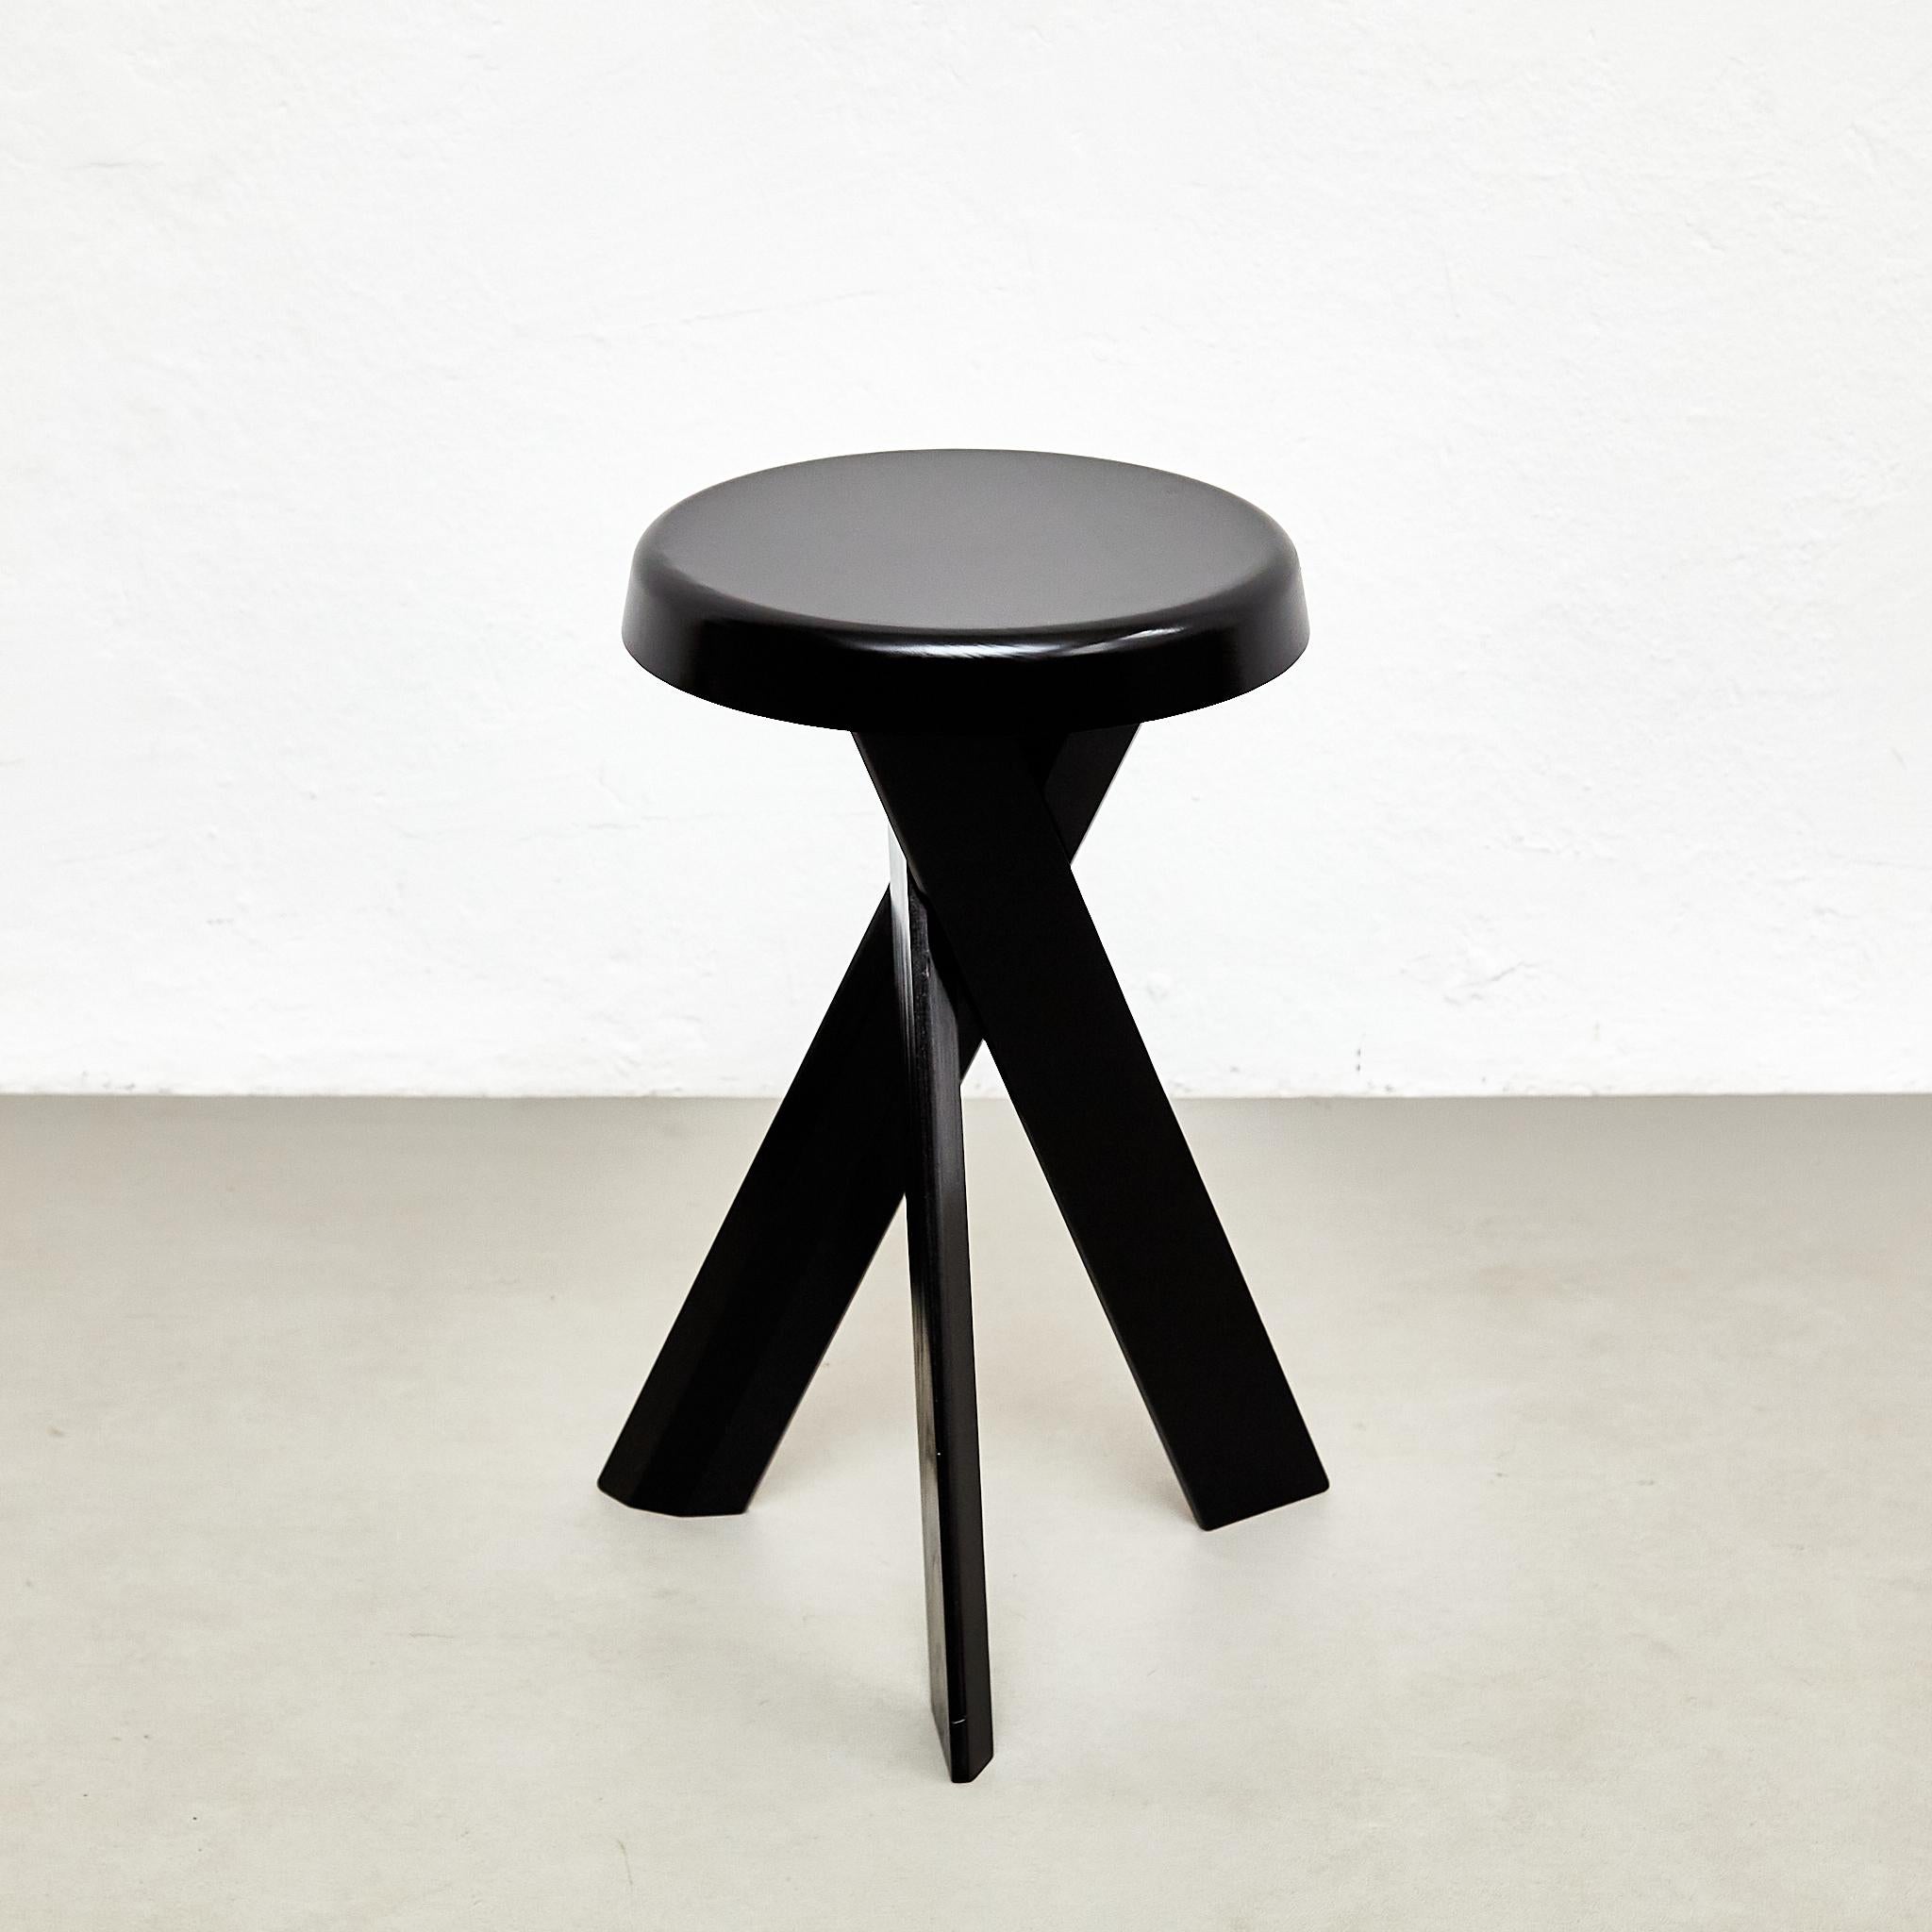 Discover the stunning Pierre Chapo S31B black edition wood stool, a rare and highly sought-after piece, designed in the 1960s and masterfully crafted by Chapo Creations in France in 2021. This exquisite solid wood stool features a unique design